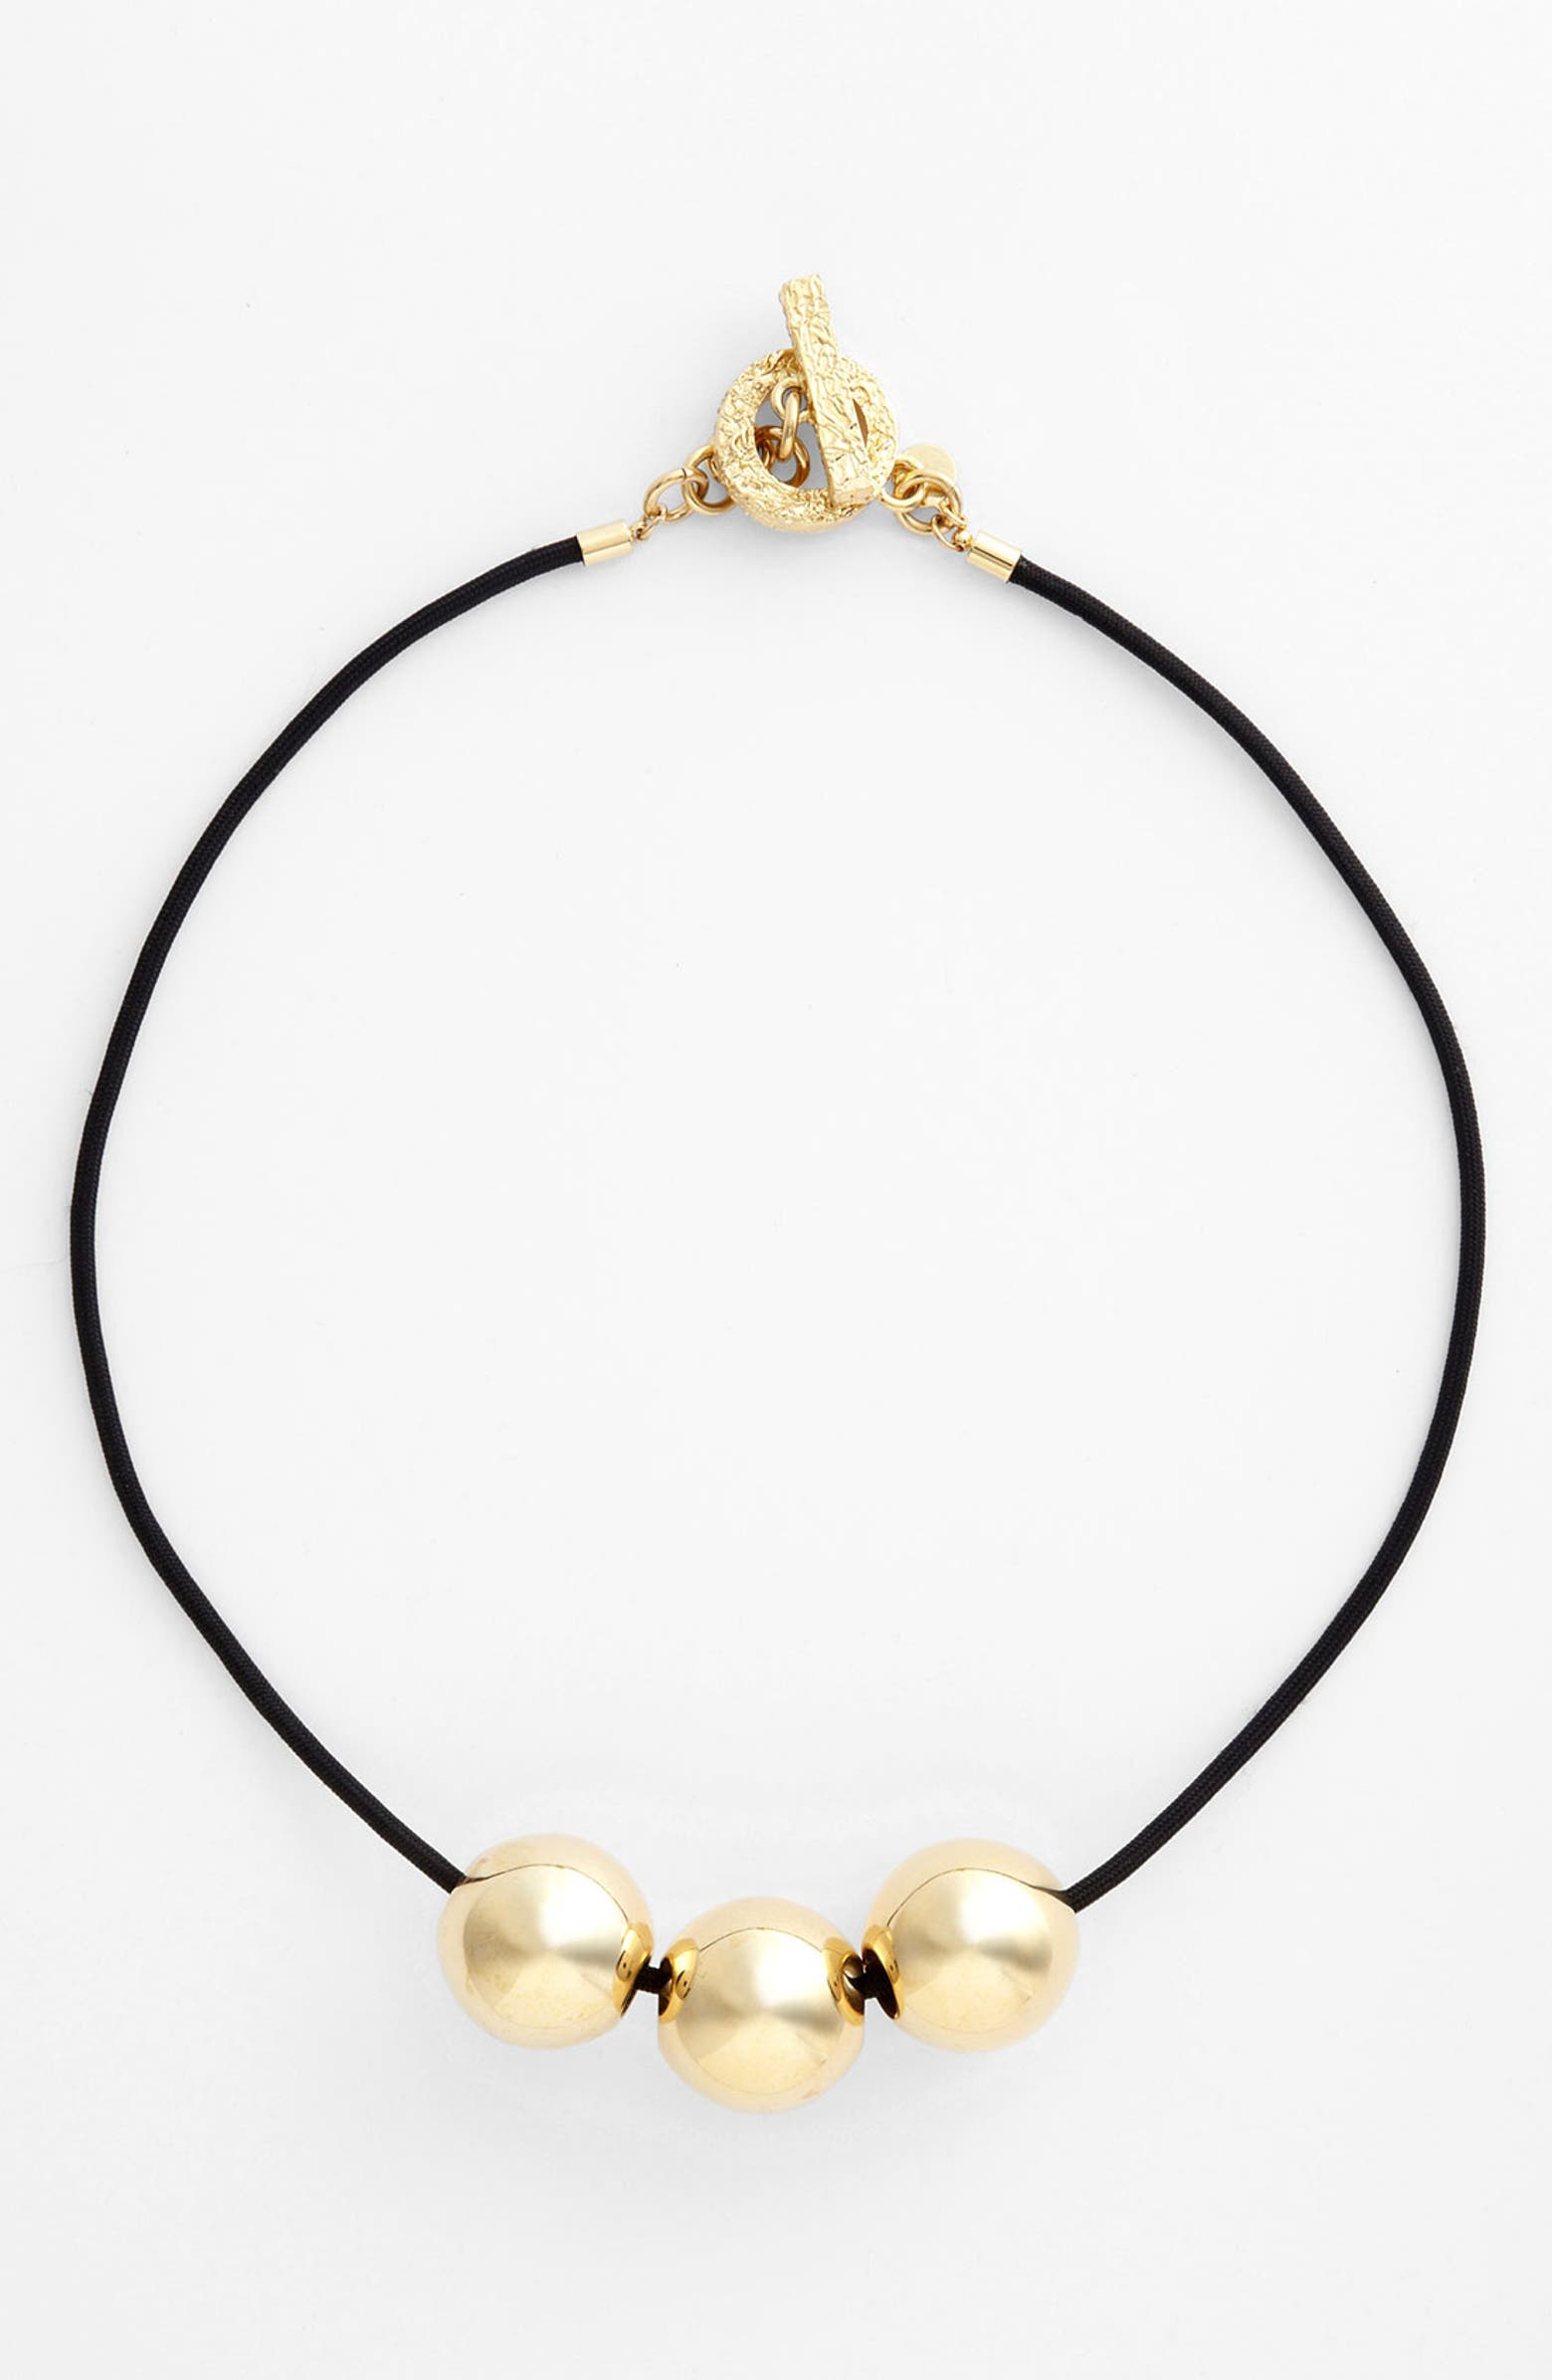 MARC BY MARC JACOBS 'Exploded Bow' Beaded Necklace | Nordstrom